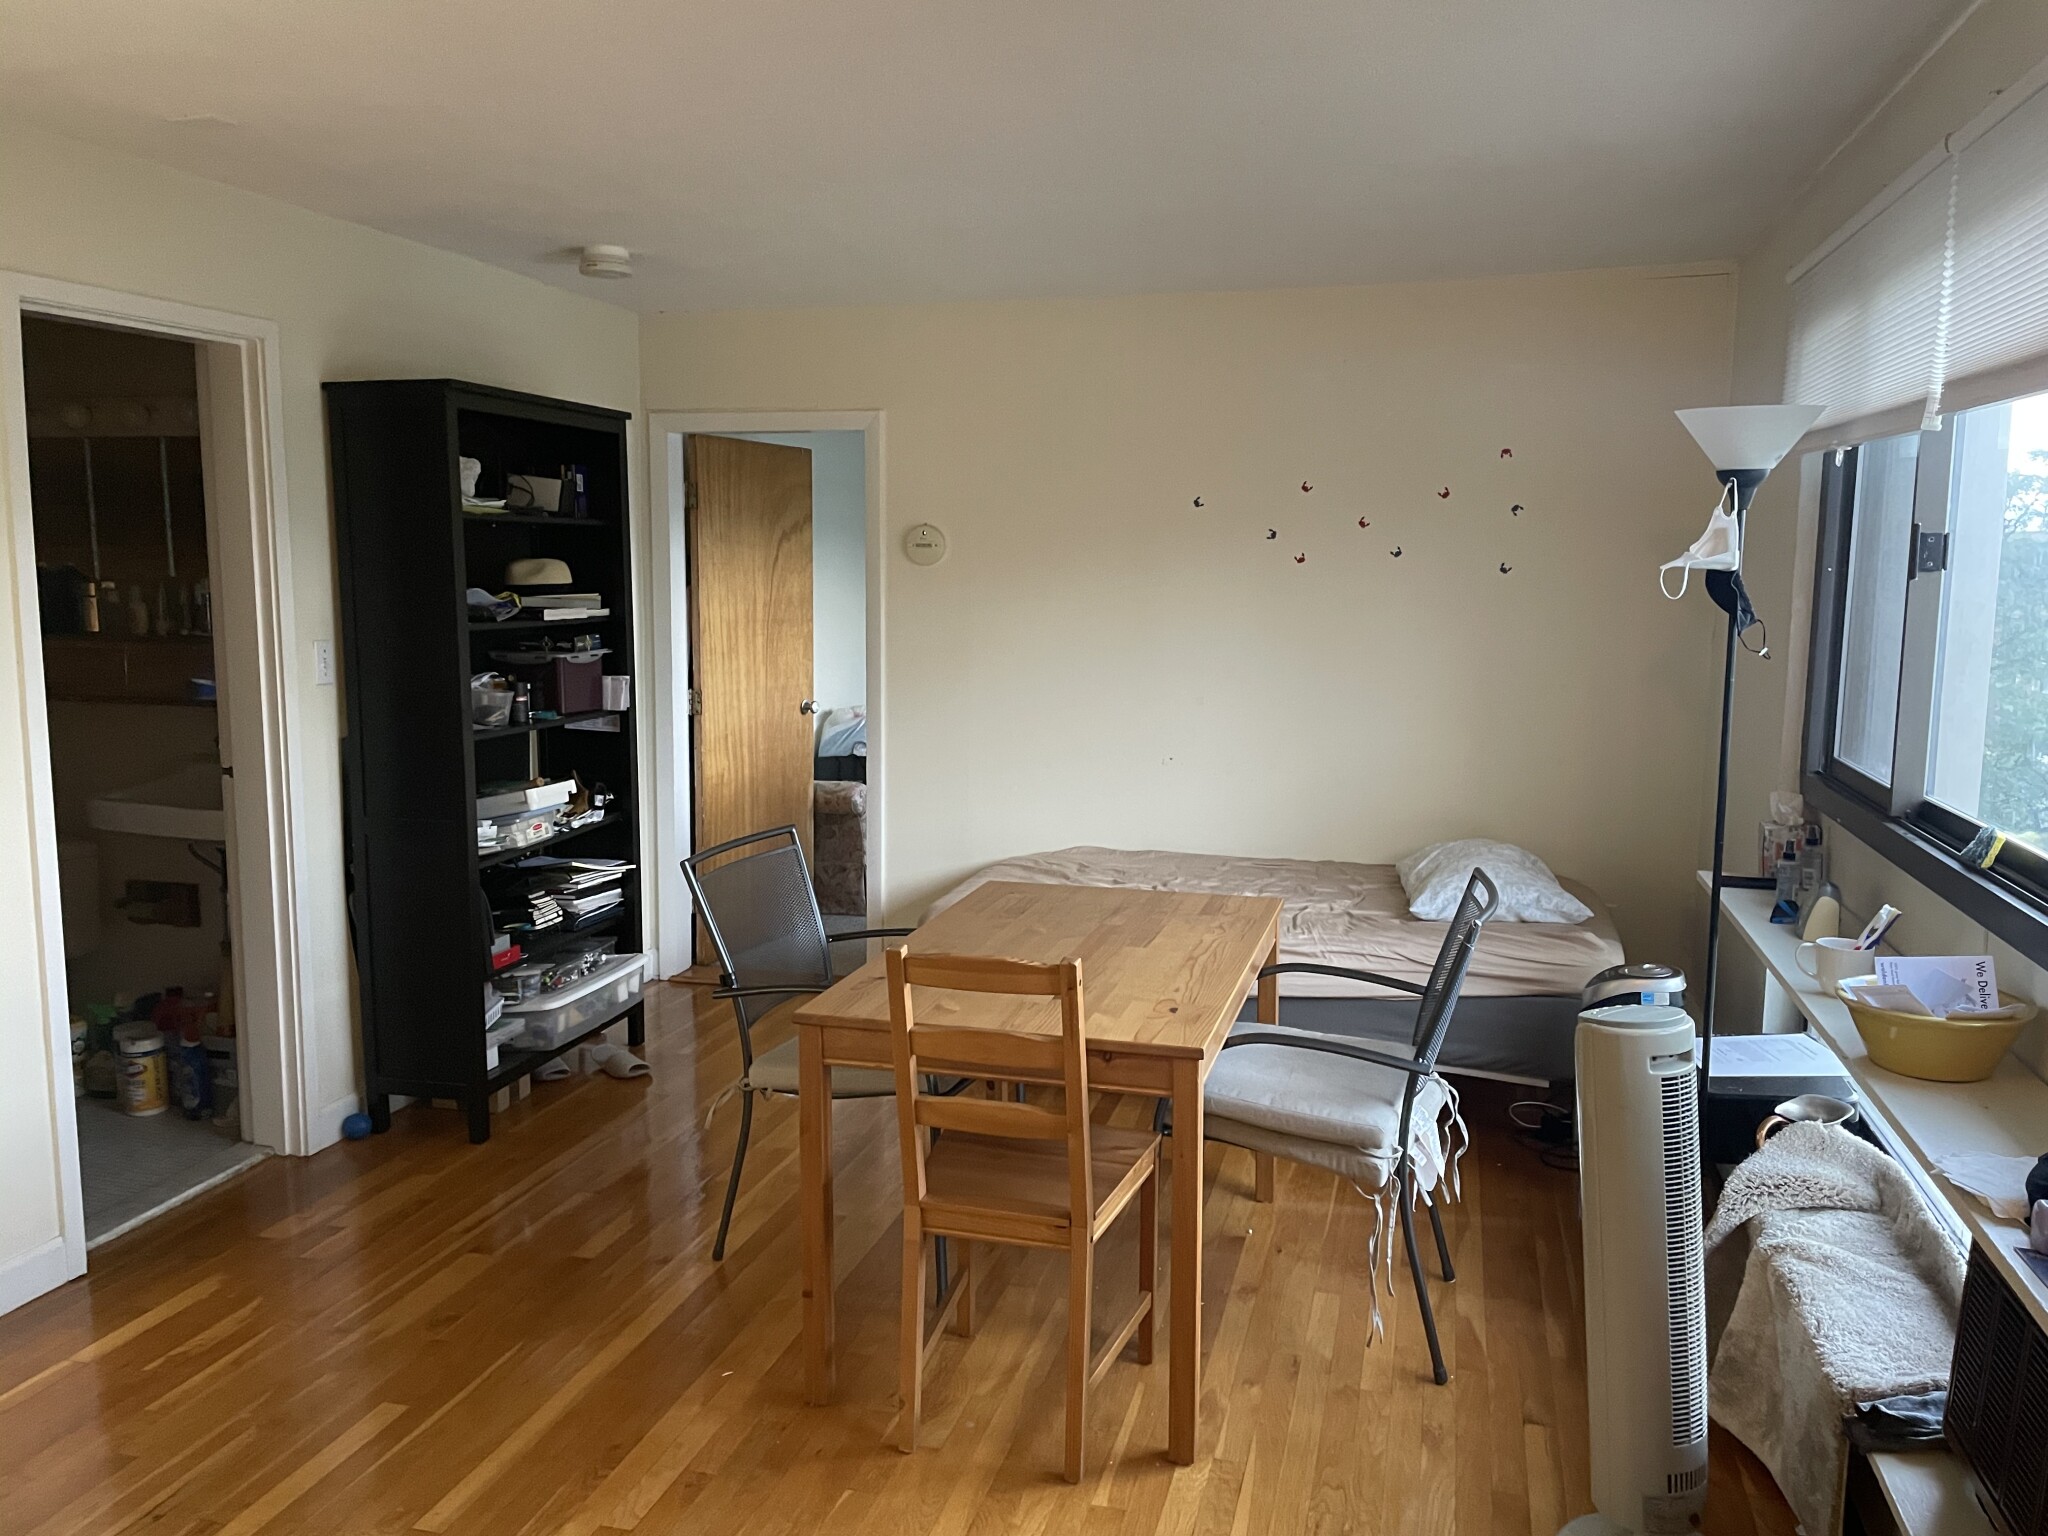 Photos of apartment on Museum St.,Cambridge MA 02138